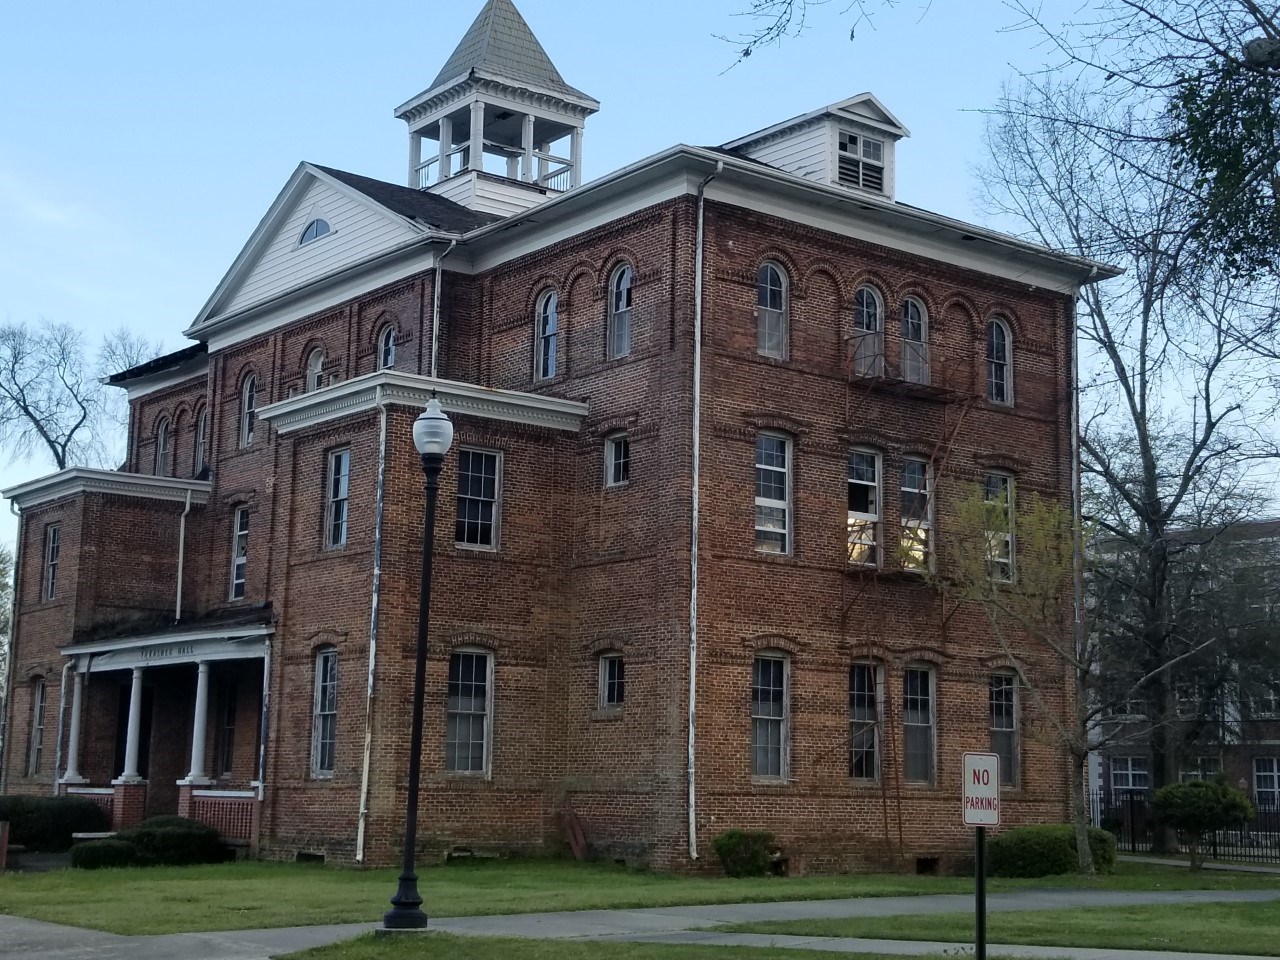 Side view of Thrasher Hall, which is the oldest building designed by Robert R. Taylor